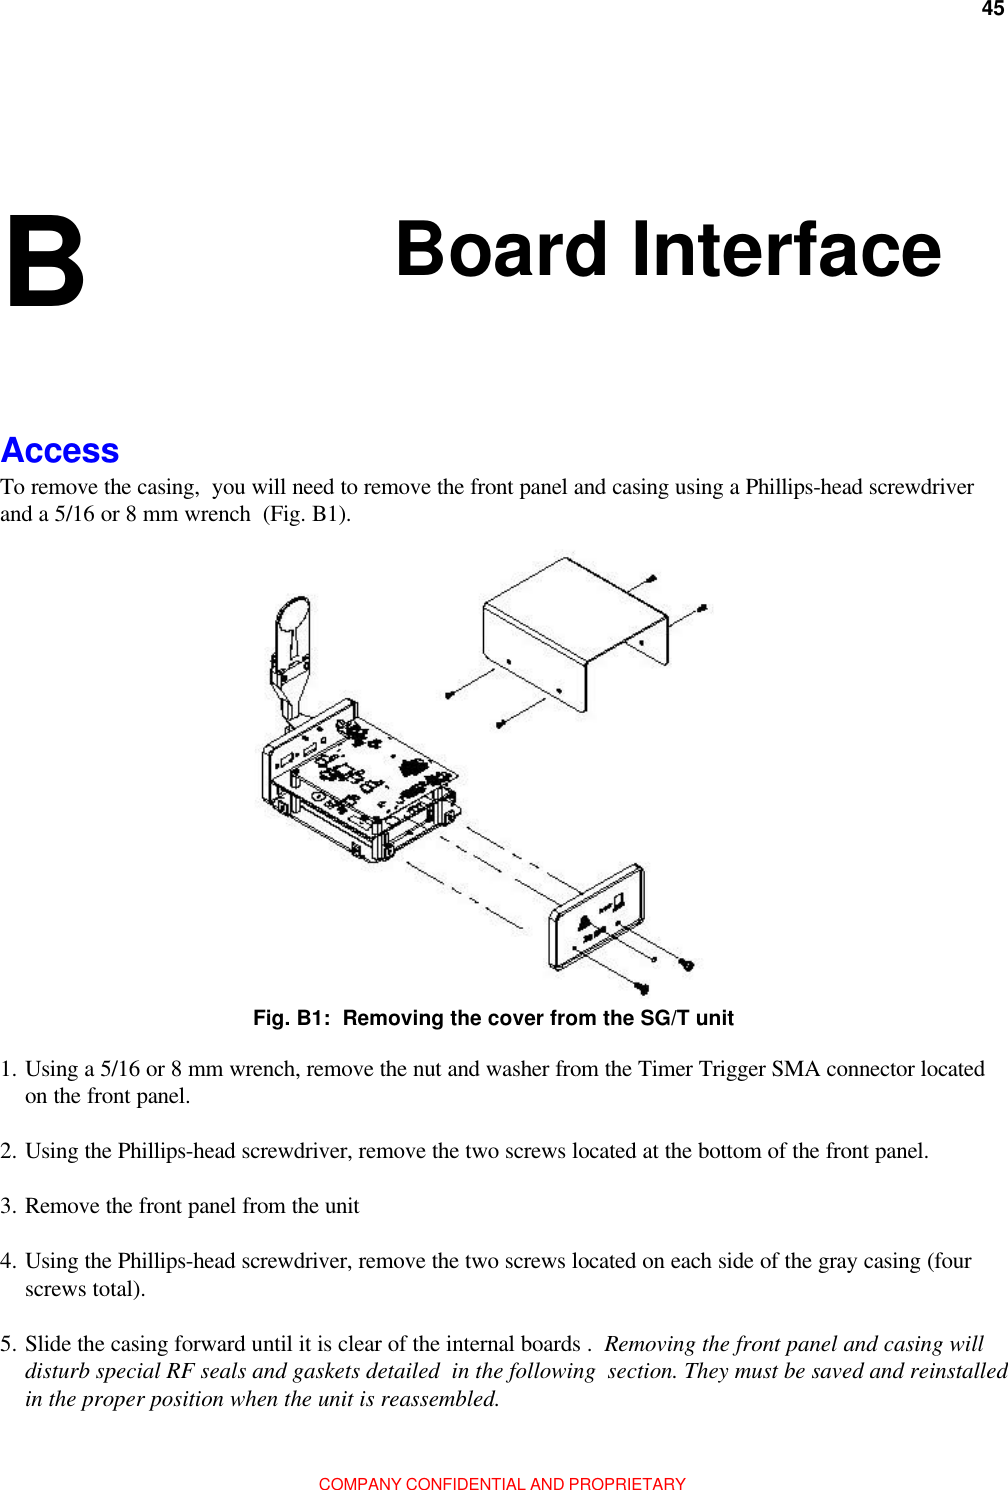 45Appendix B: Board InterfaceCOMPANY CONFIDENTIAL AND PROPRIETARYBoard InterfaceB AccessTo remove the casing,  you will need to remove the front panel and casing using a Phillips-head screwdriverand a 5/16 or 8 mm wrench  (Fig. B1).1. Using a 5/16 or 8 mm wrench, remove the nut and washer from the Timer Trigger SMA connector locatedon the front panel.2. Using the Phillips-head screwdriver, remove the two screws located at the bottom of the front panel.3. Remove the front panel from the unit4. Using the Phillips-head screwdriver, remove the two screws located on each side of the gray casing (fourscrews total).5. Slide the casing forward until it is clear of the internal boards .  Removing the front panel and casing willdisturb special RF seals and gaskets detailed  in the following  section. They must be saved and reinstalledin the proper position when the unit is reassembled.Fig. B1:  Removing the cover from the SG/T unit